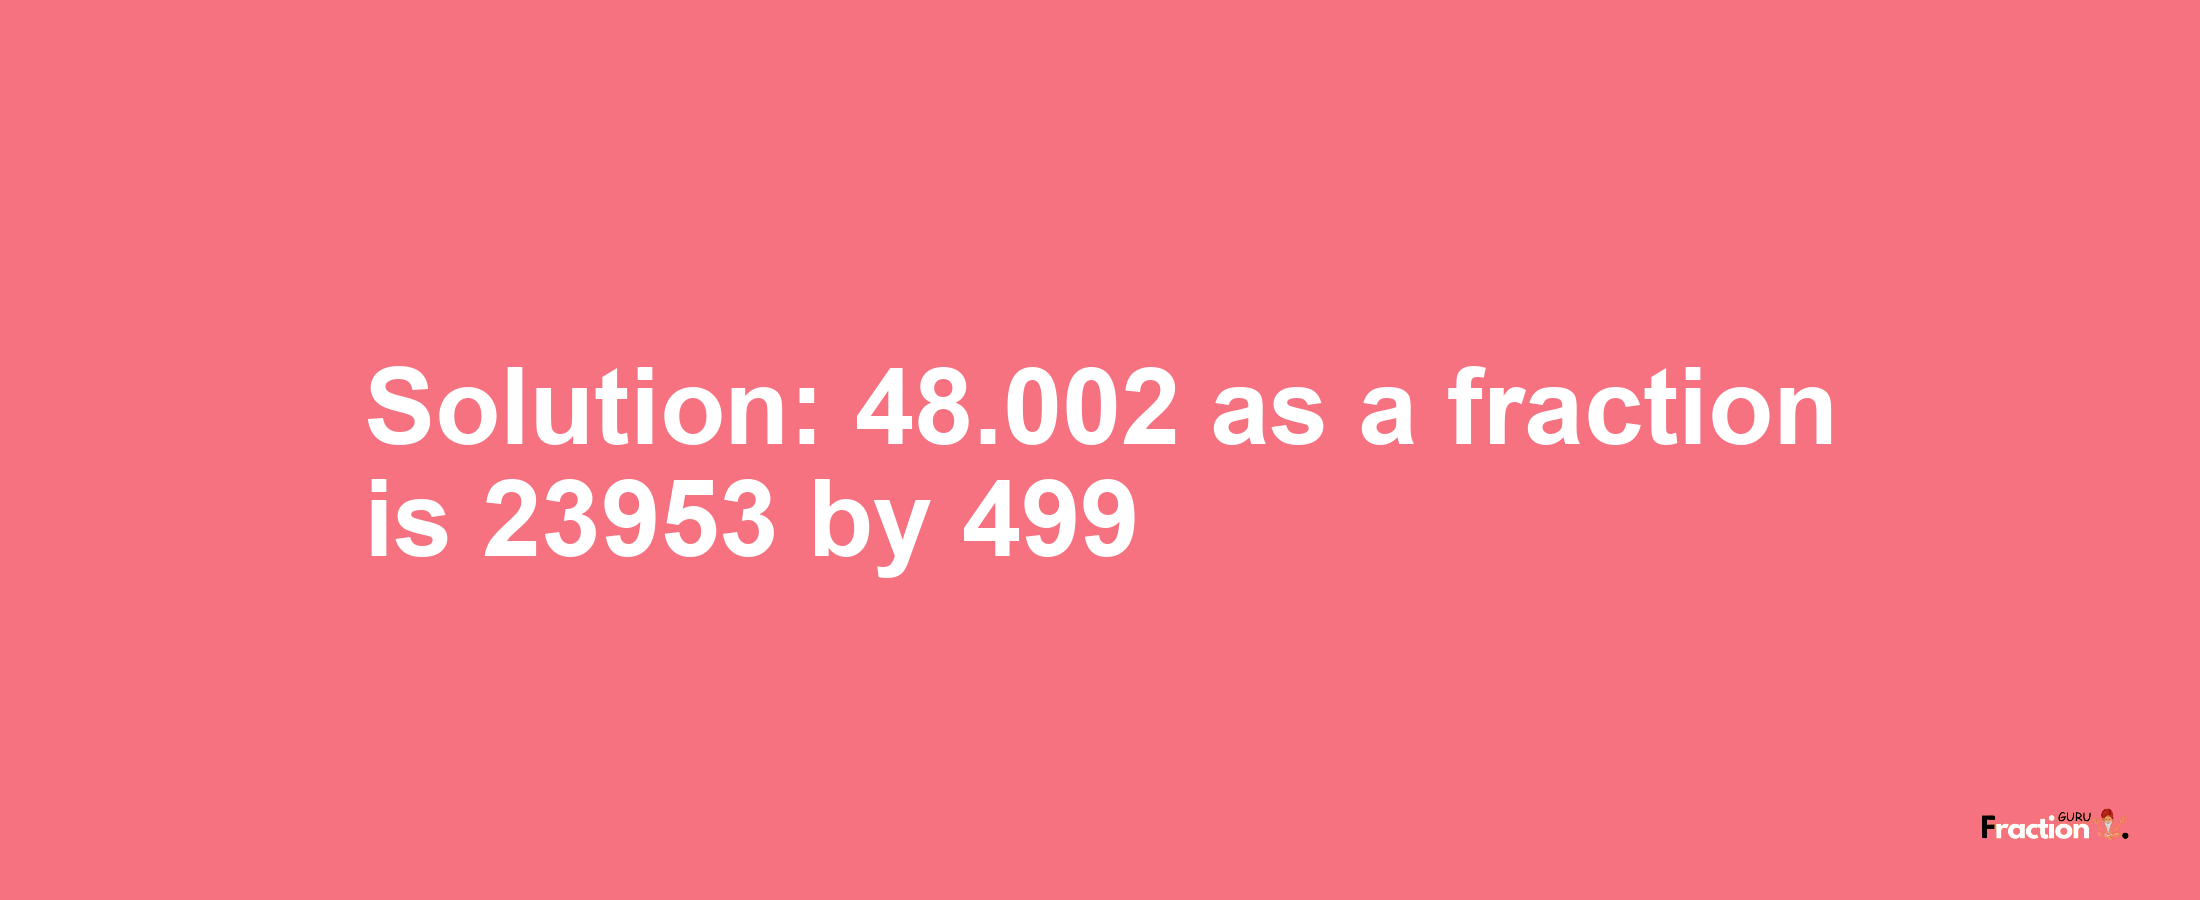 Solution:48.002 as a fraction is 23953/499